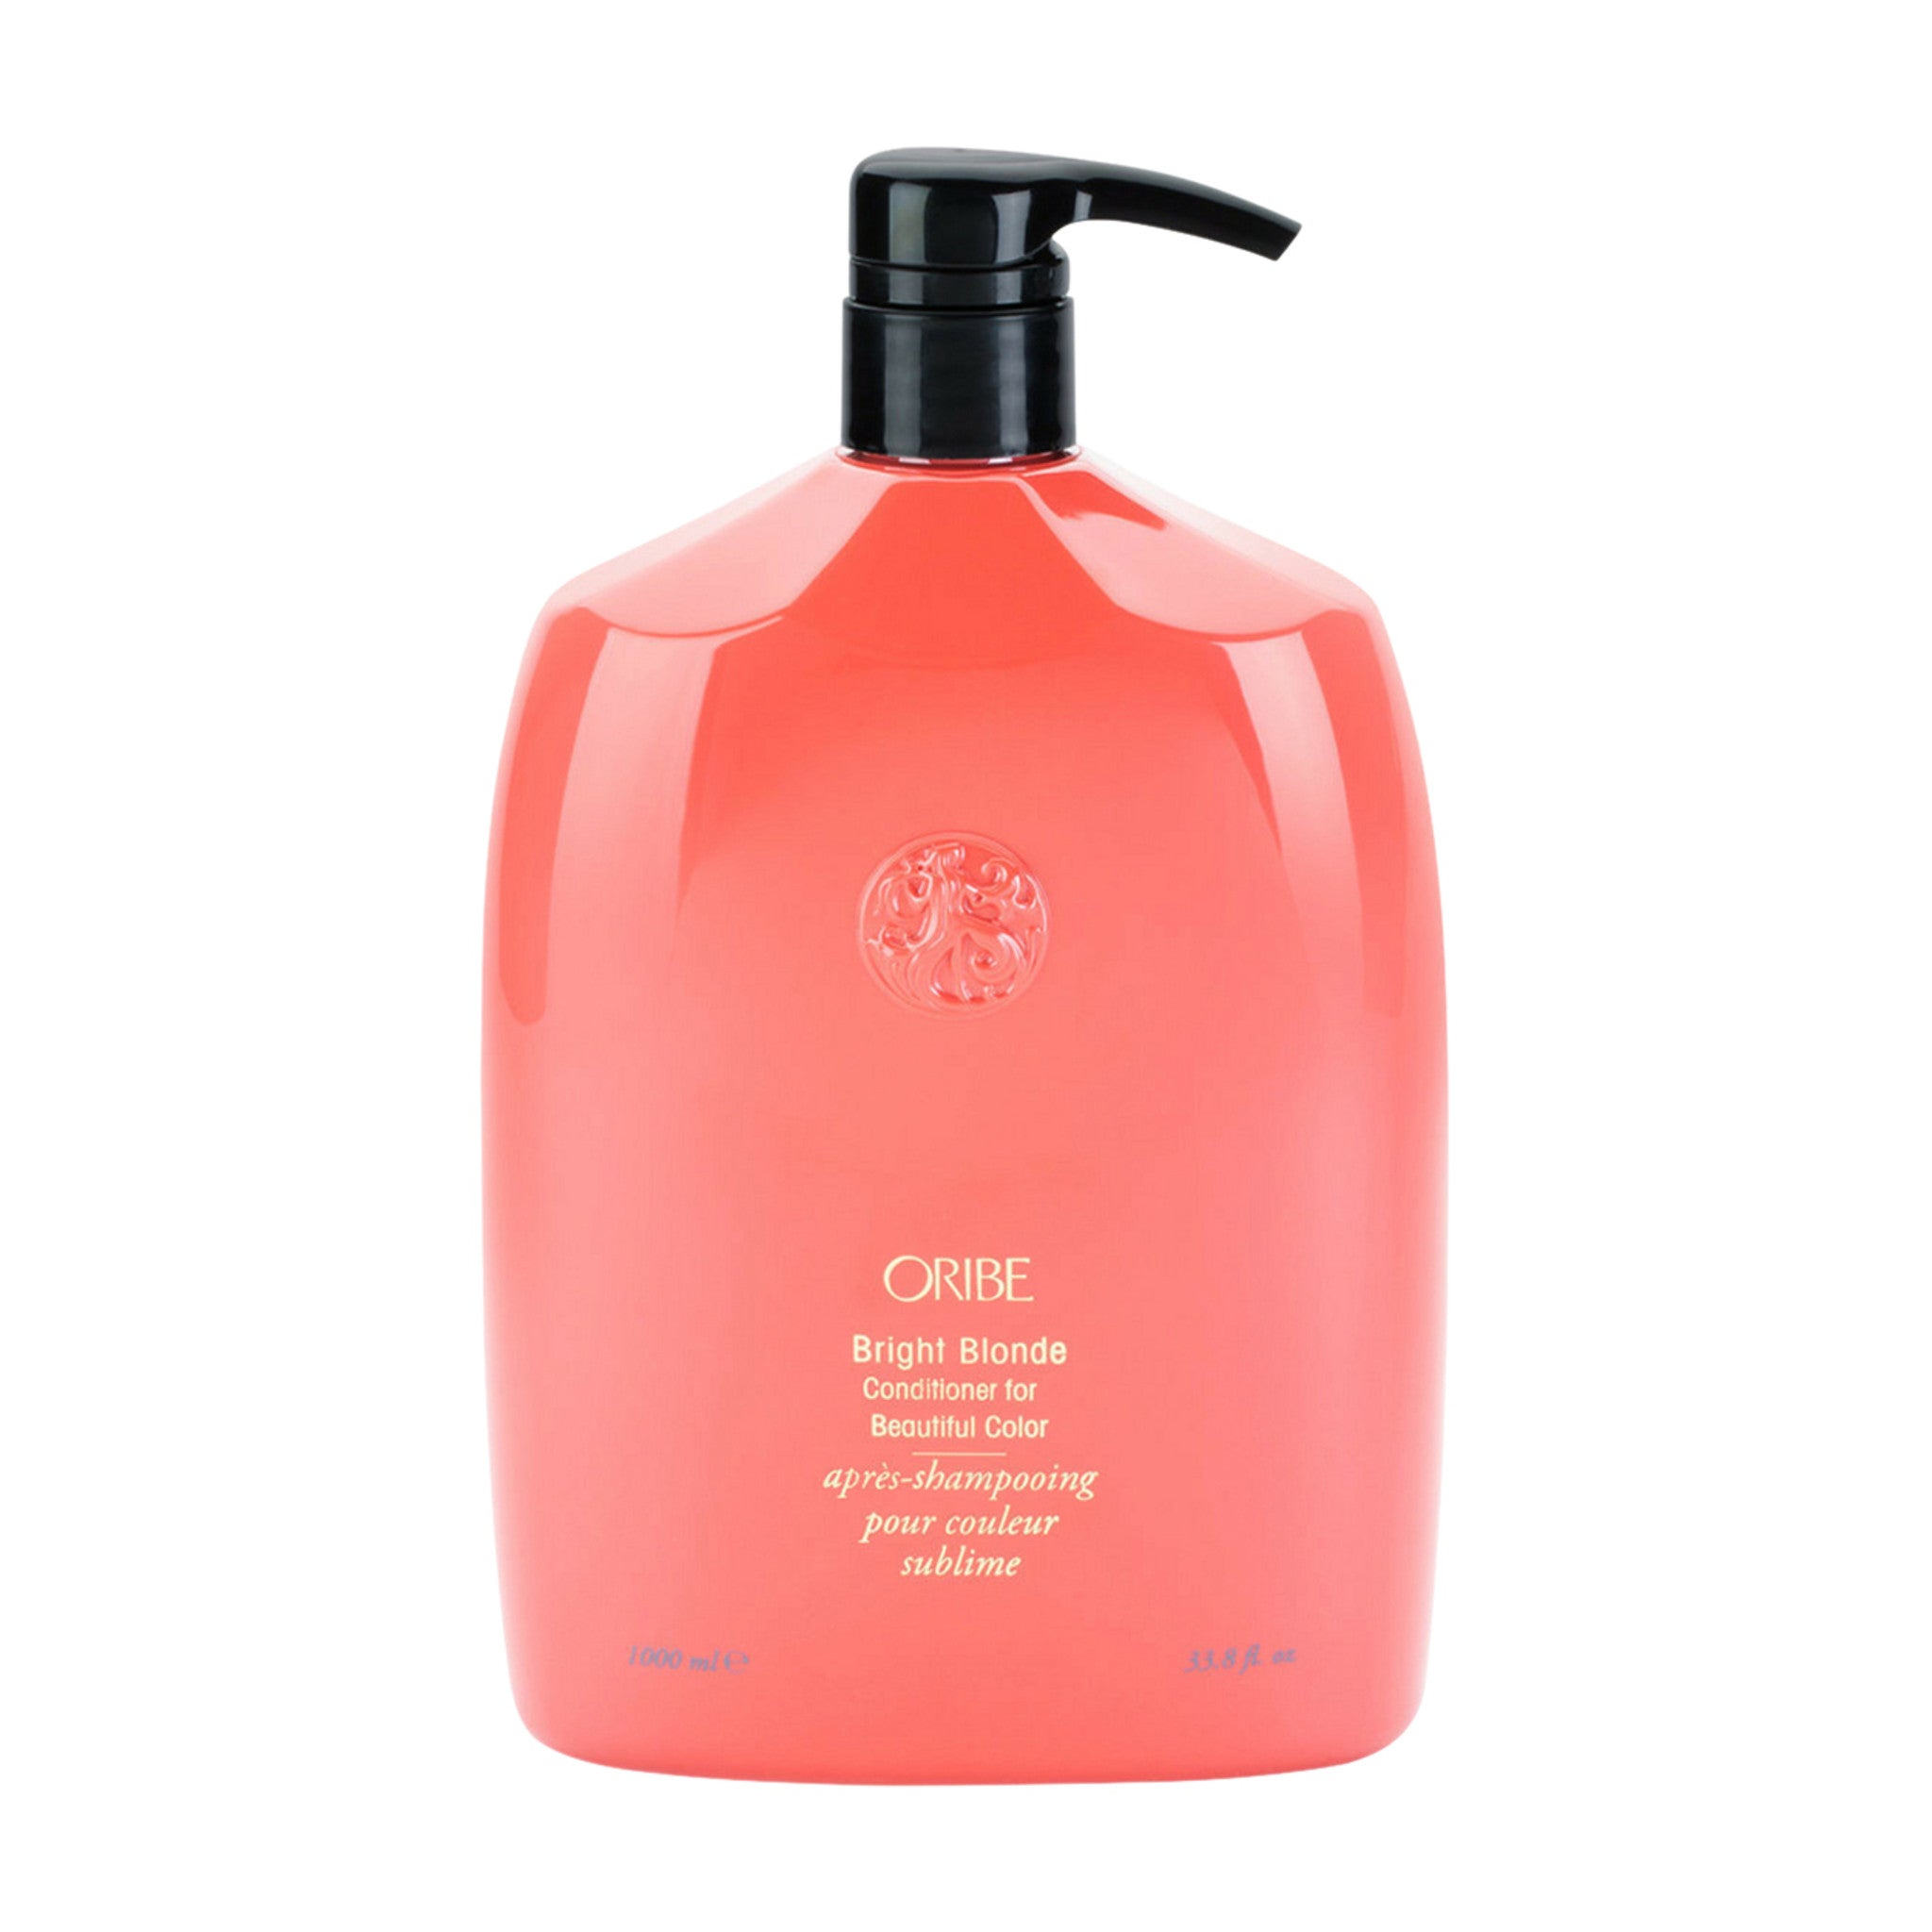 Oribe Bright Blonde For Beautiful Color Conditioner Size variant: 33.8 oz main image.